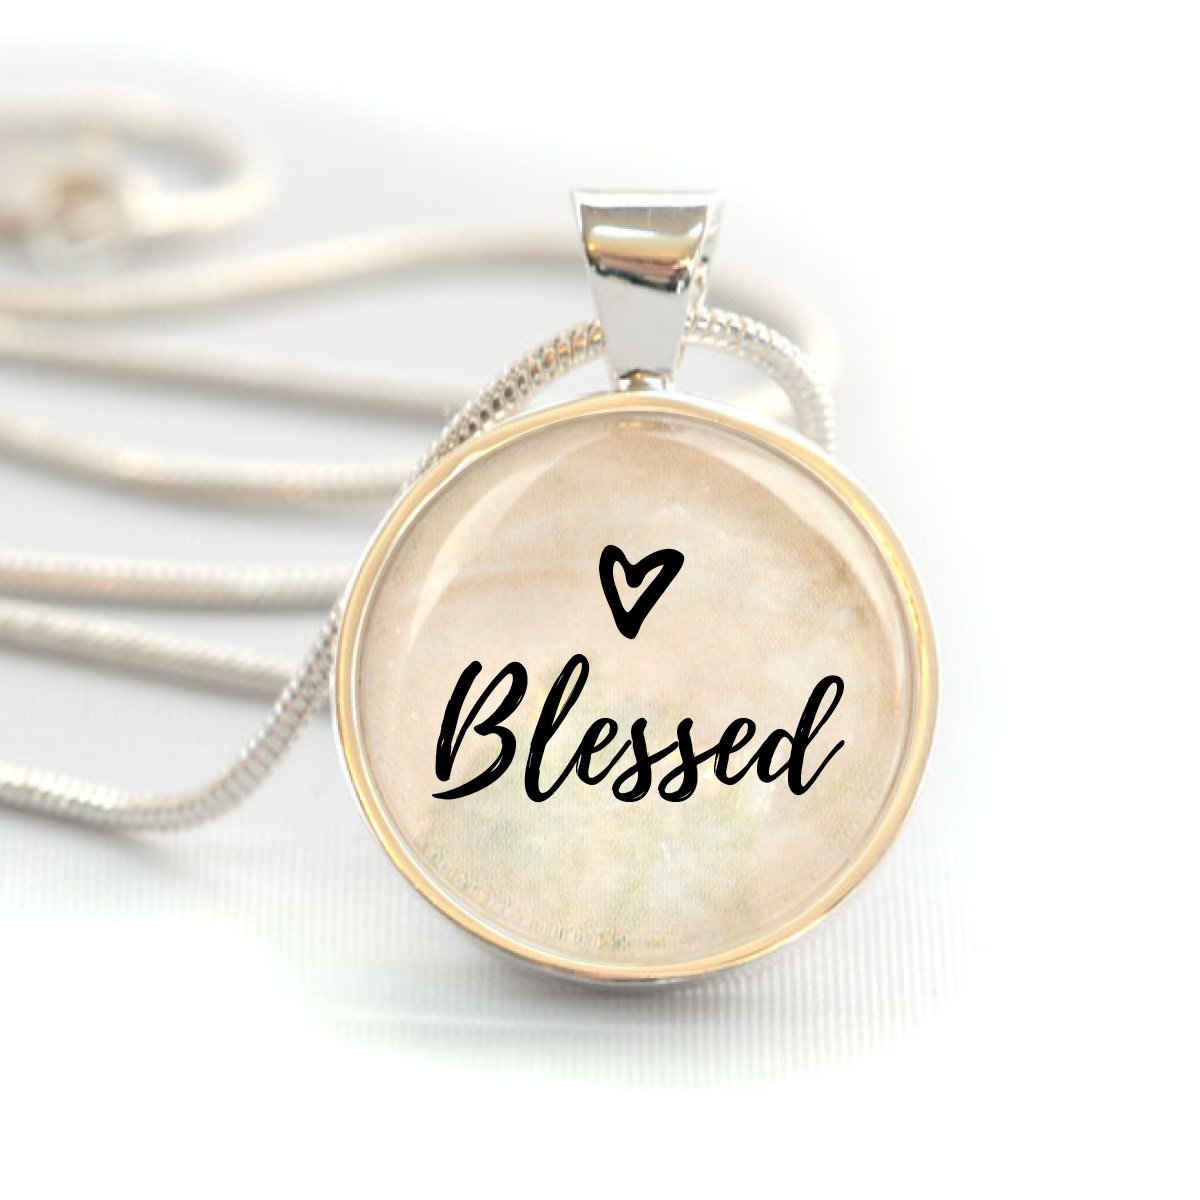 Blessed Silver-Plated Pendant Necklace - Handcrafted, 20" Chain, Heart Illustration, Nickel-Free Bijou Her